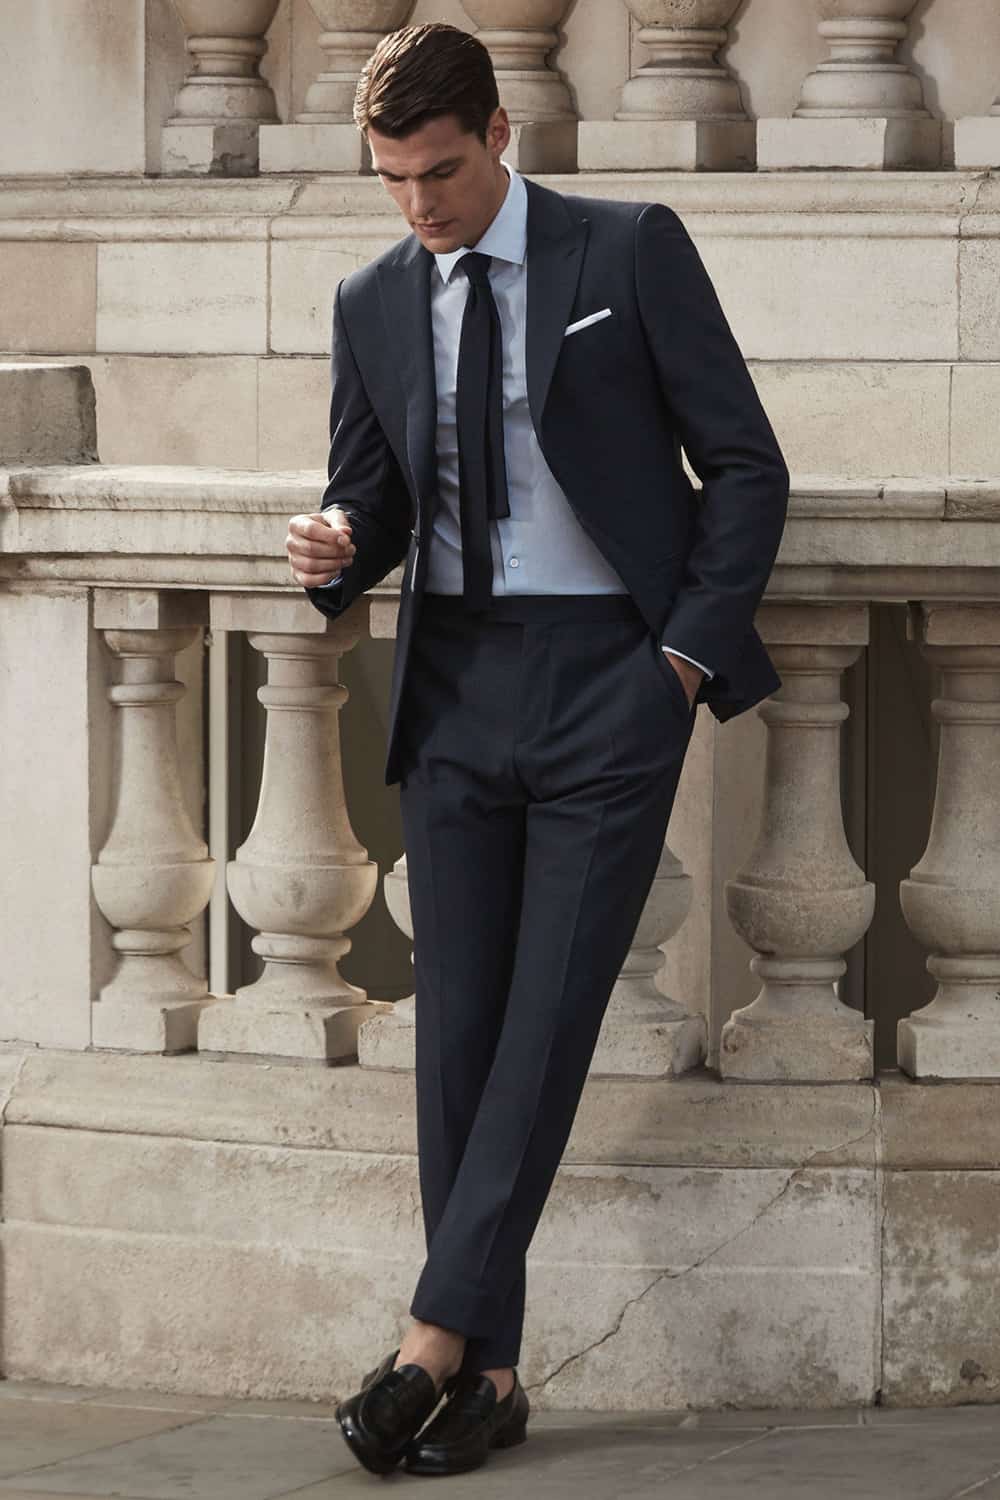 Charcoal grey suit, pale blue shirt, and black loafers